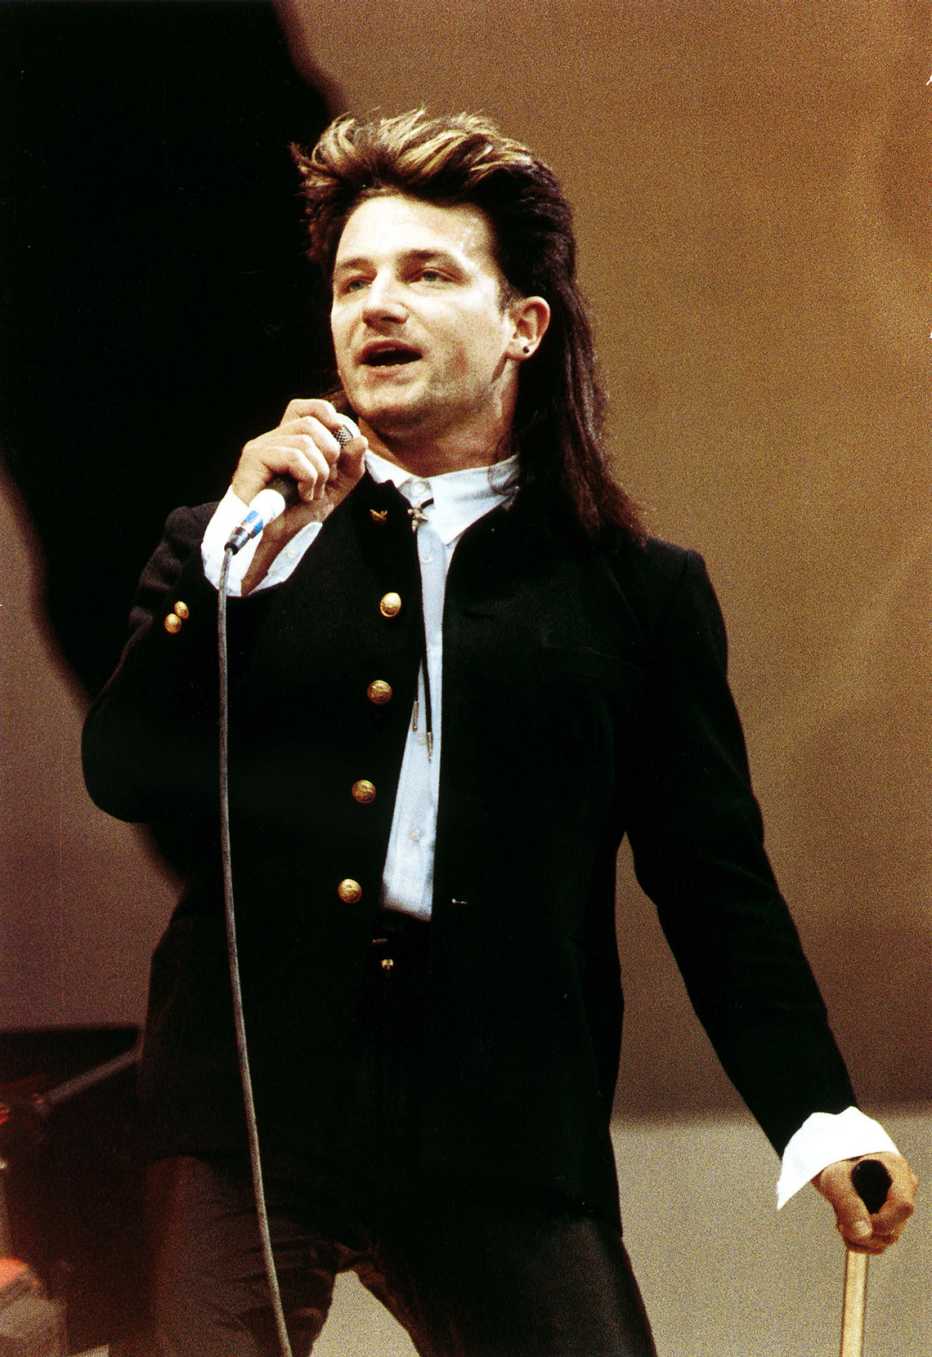 Bono holding a microphone while performing onstage at Live Aid in Wembley Stadium